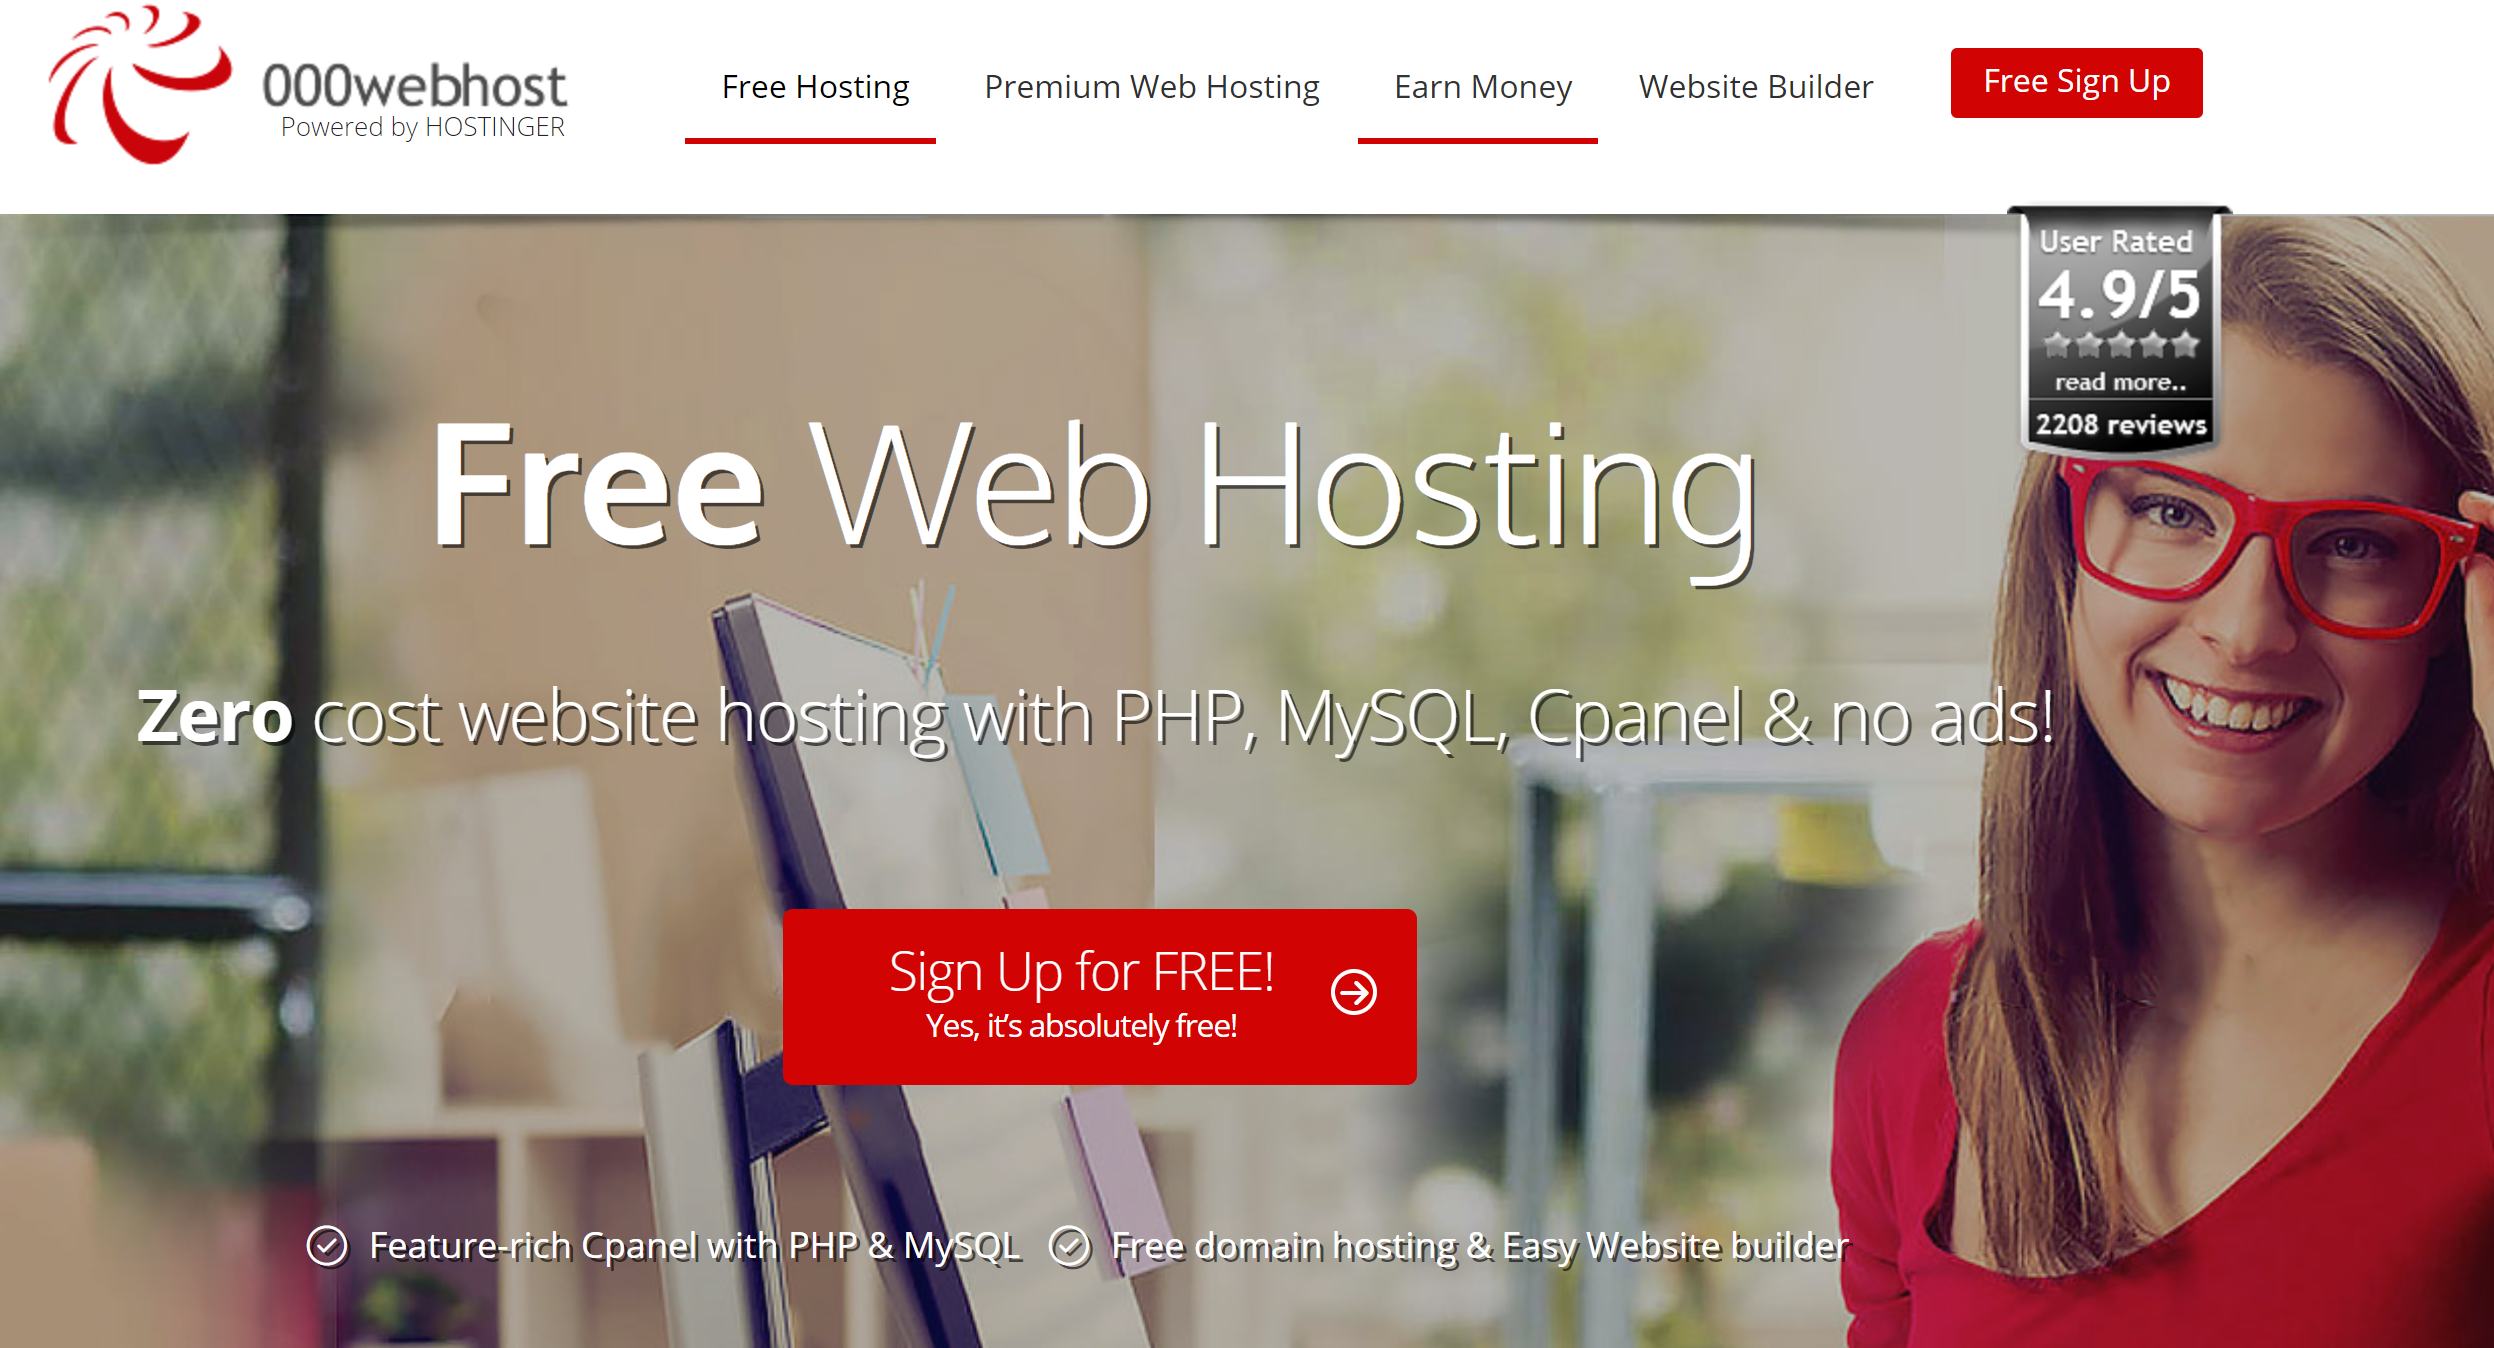 000webhost Hosting Review With Pros and Cons In Detailed